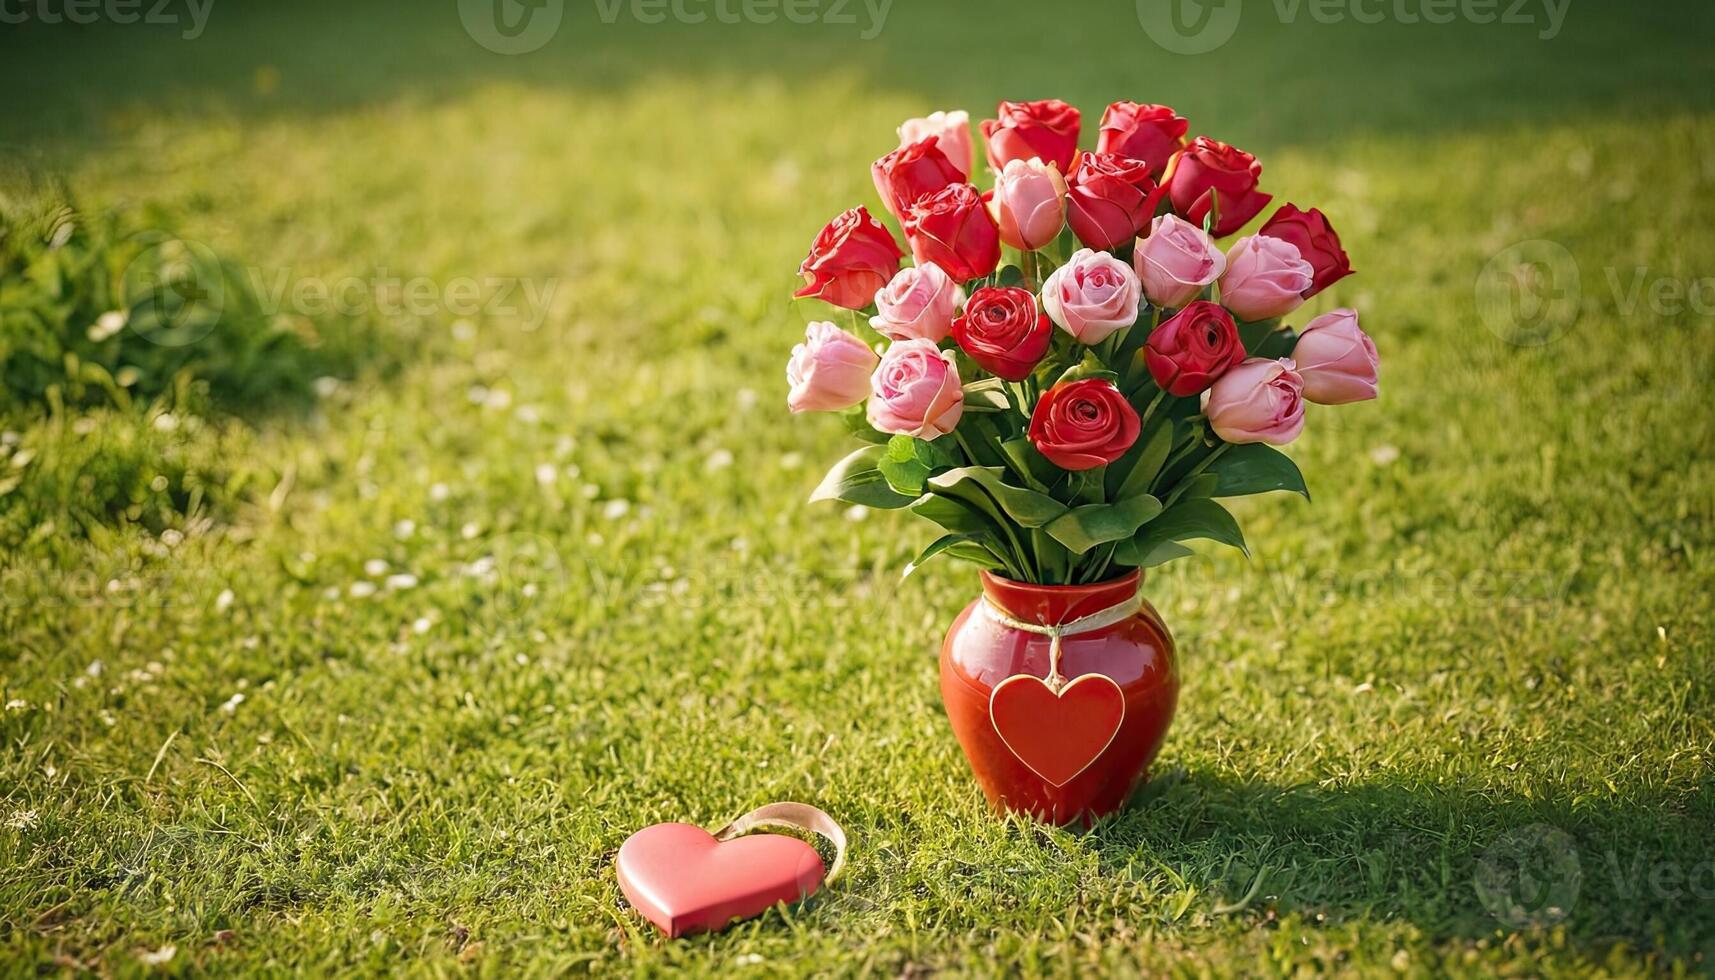 AI Generated Red and pink roses in heart-shaped vase, grassy field, romantic gesture, Valentine Day love symbol, outdoor setting, natural light, soft focus, warm tones, floral arrangement, gift idea, photo